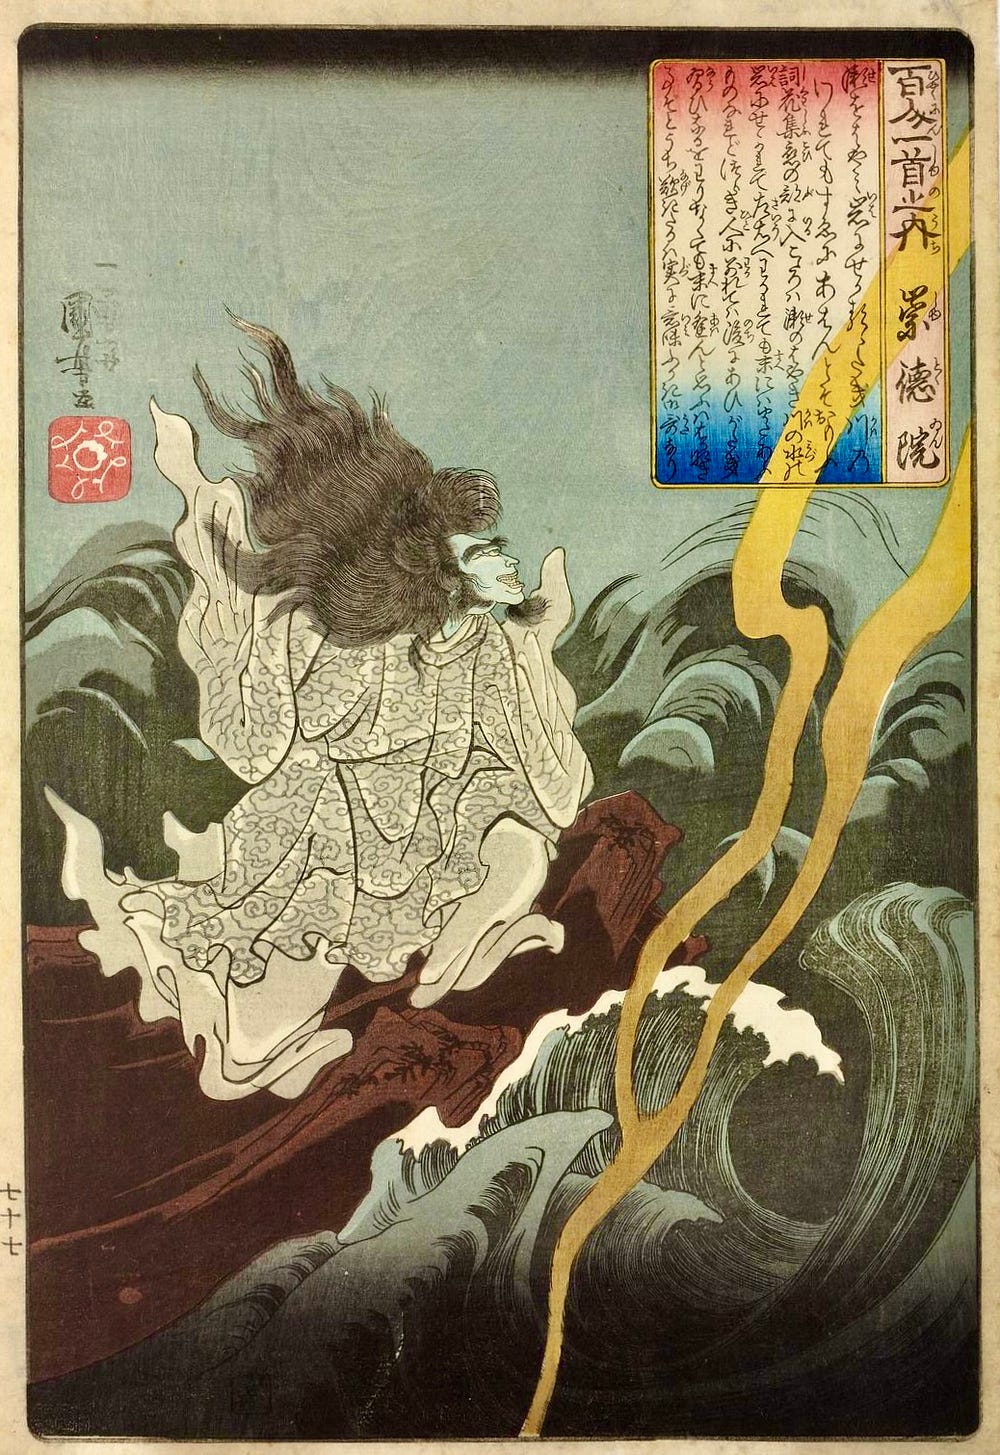 Emperor Sutoku, clothed in flowing robes with hair blowing upwards and a crazed pale face, stands on an outcropping of rock over a raging sea.